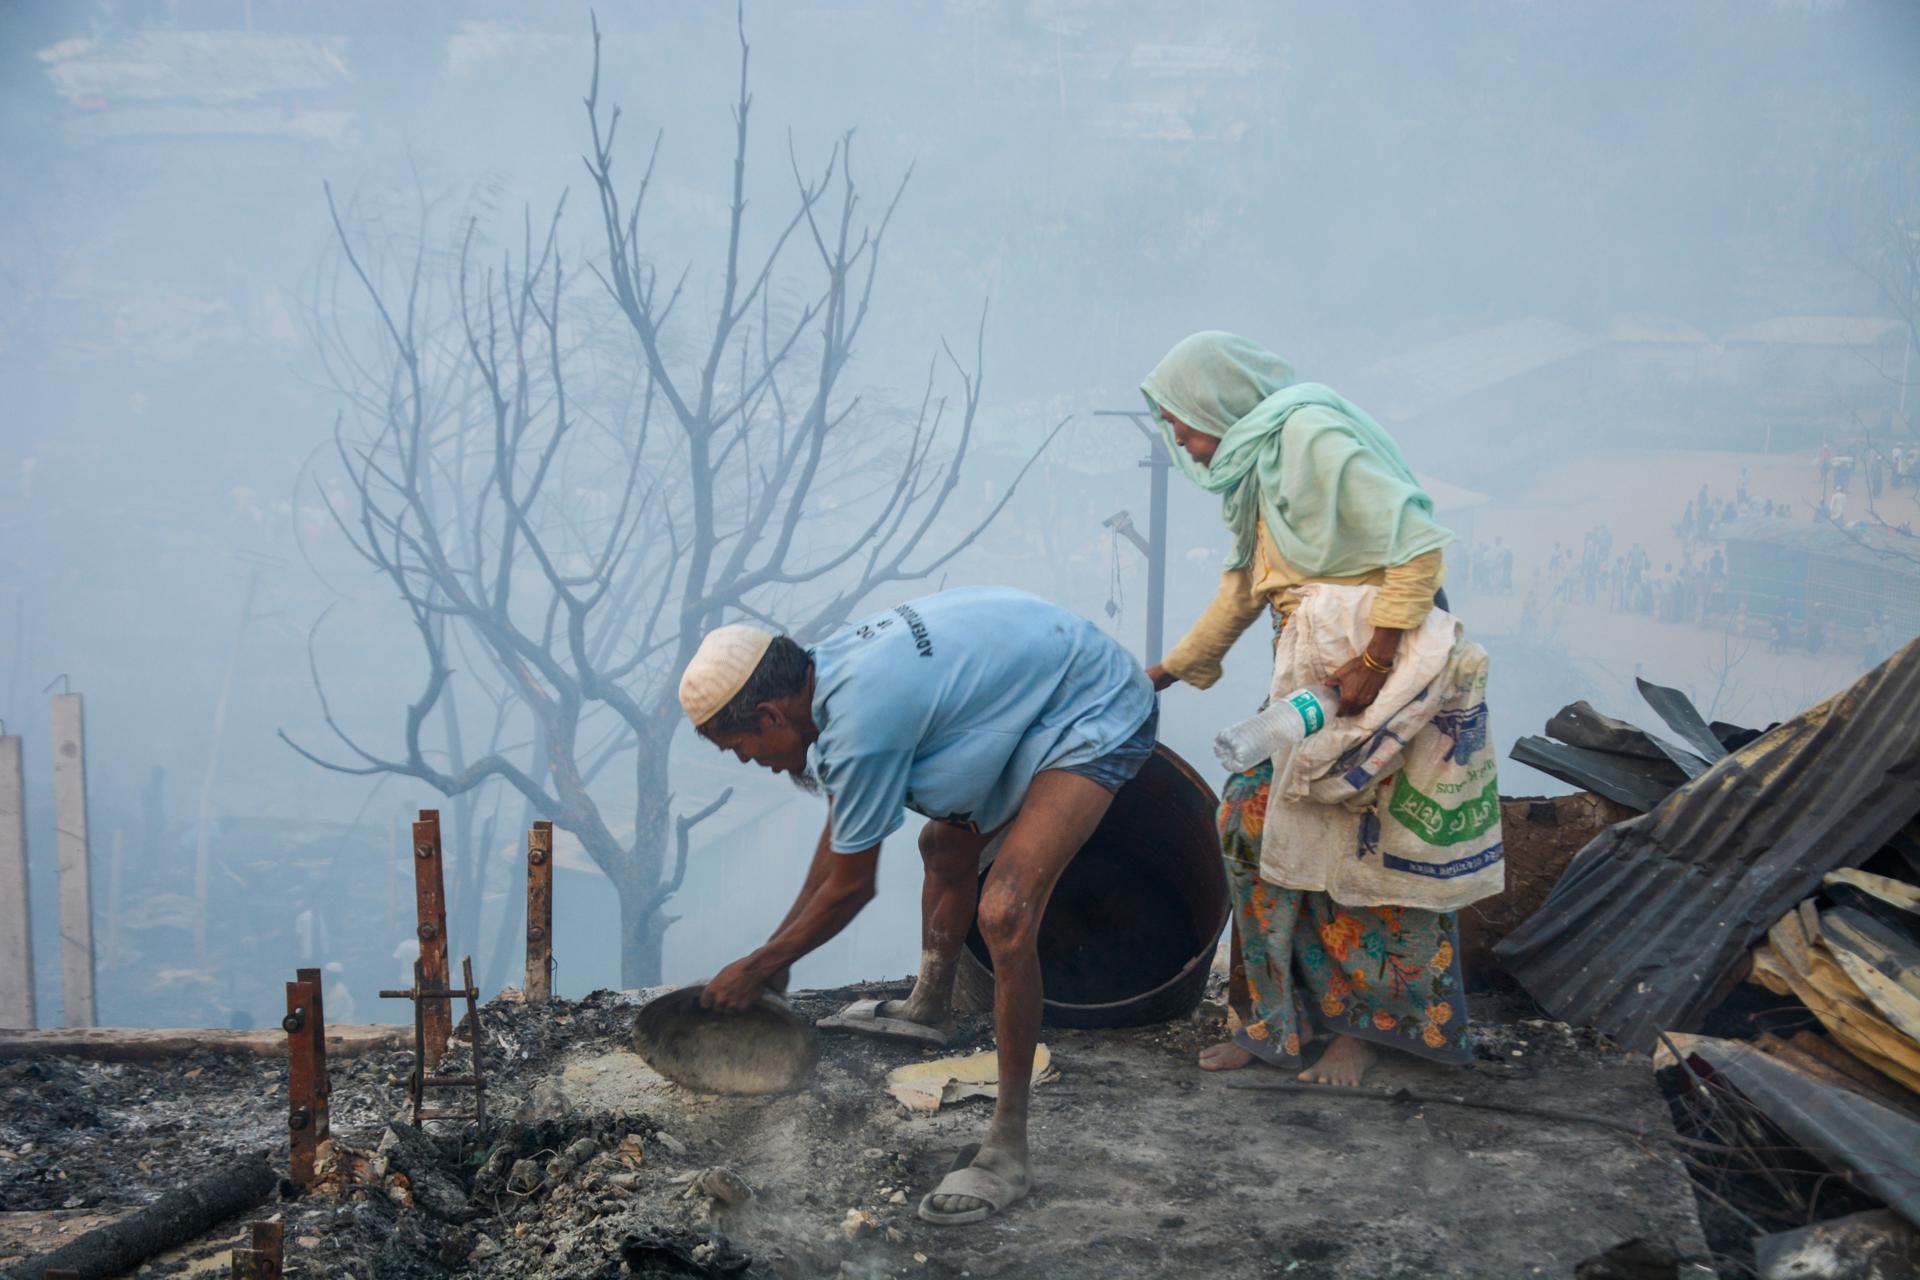 Rohingya refugees search for their belongings after a fire broke out in Balukhali refugee camp in Ukhia, Cox'Äôs bazar, Bangladesh, 05 March 2023. According to the United Nations High Commissioner for Refugees (UNHCR) report, over 90 facilities including hospitals and learning centres were damaged as a massive fire broke out at a Rohingya camp in Cox's Bazar's Ukhiya upazila on 05 March afternoon. (Incendio) EFE/EPA/STR